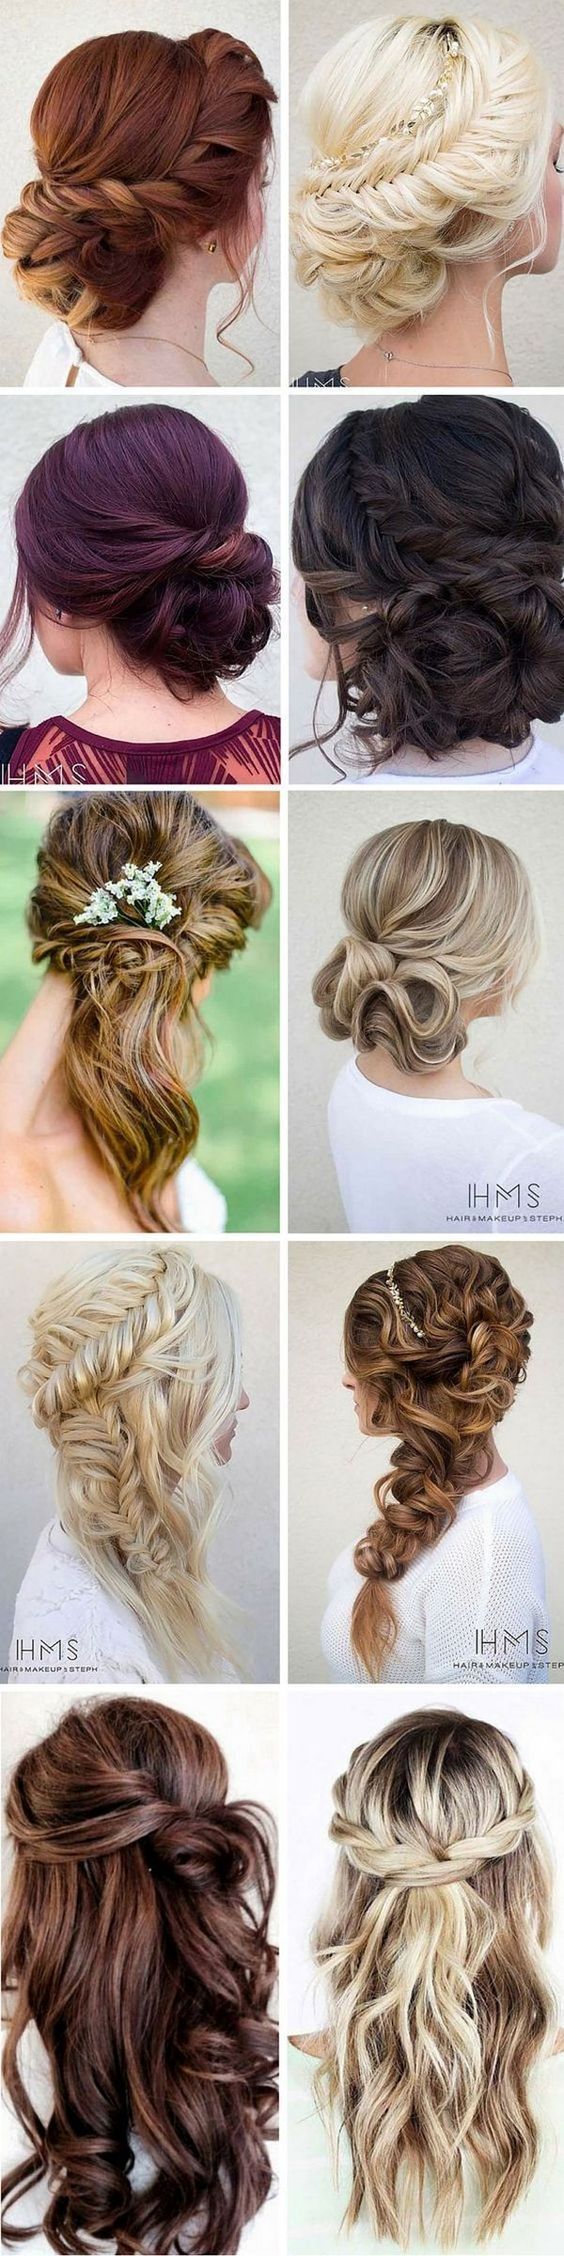 Hottest Bridesmaids Hairstyles For Short or Long Hair / www.himisspuff.co…: